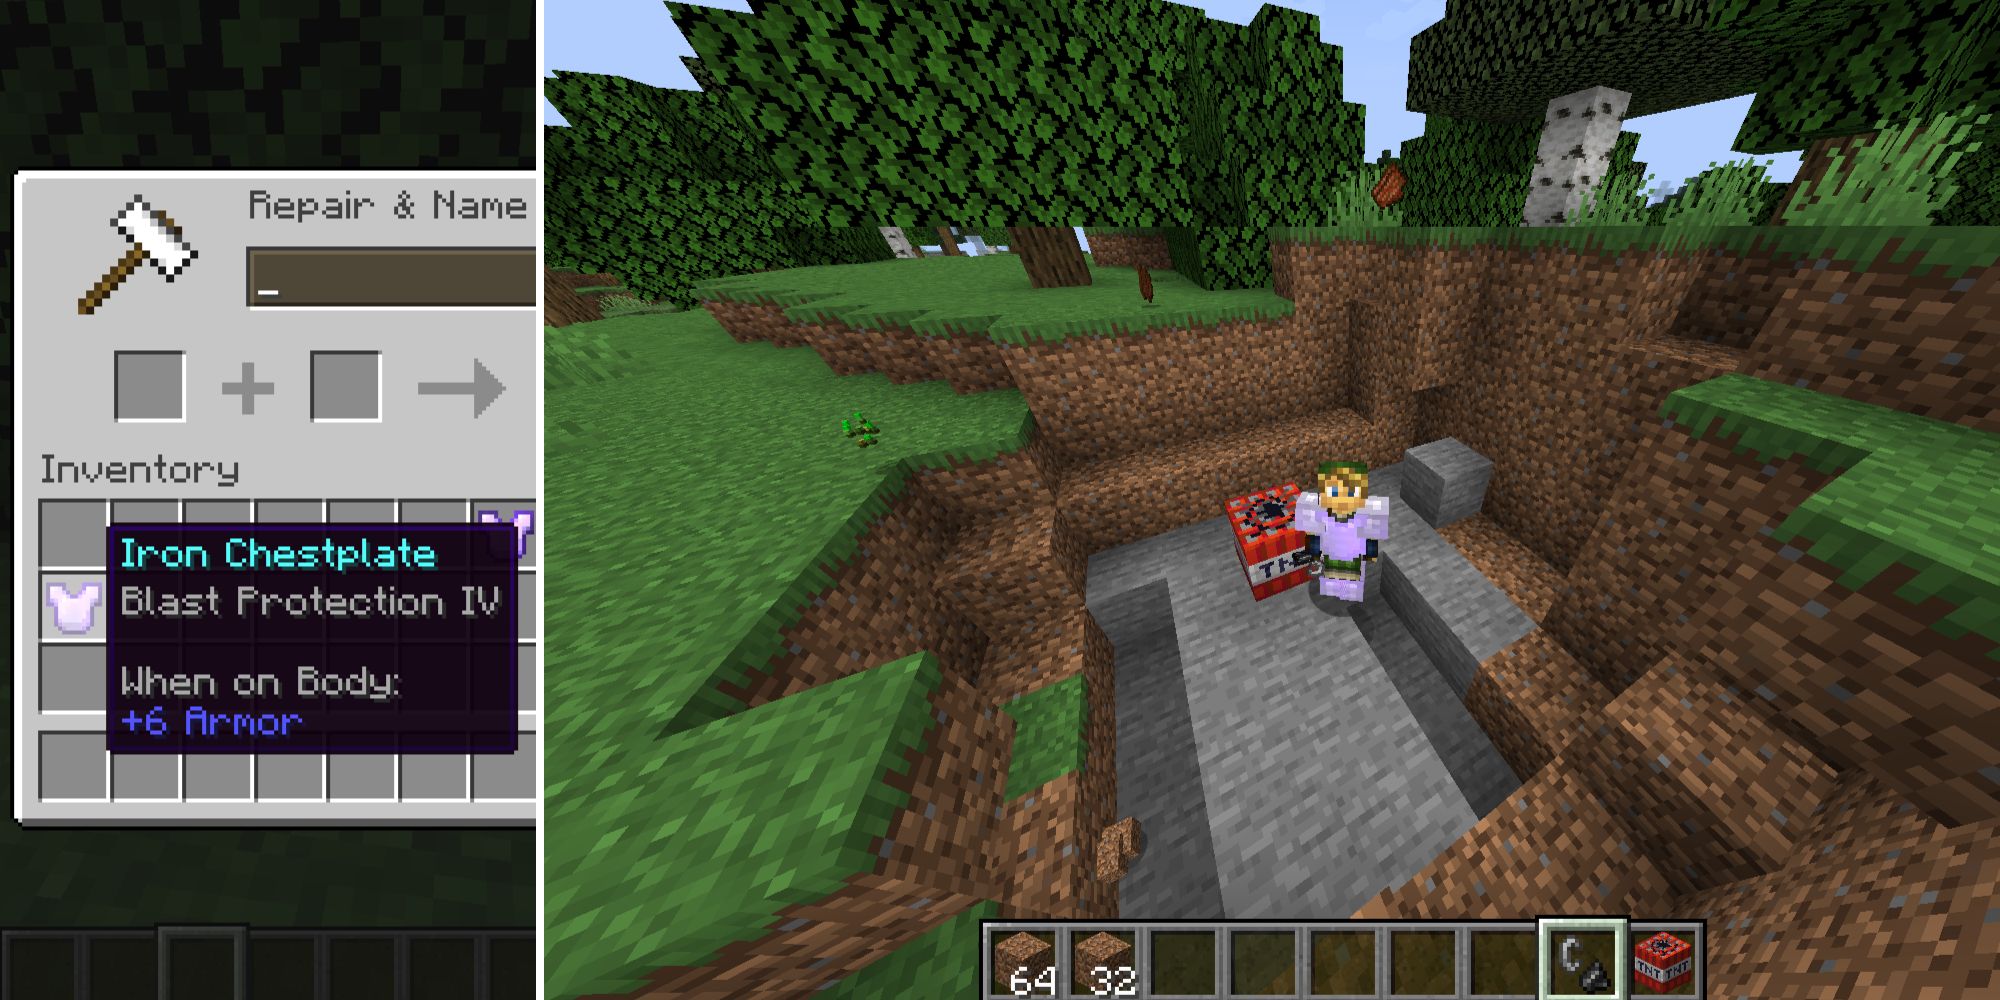 Blast Protection armor and the player inside the blast crater in Minecraft